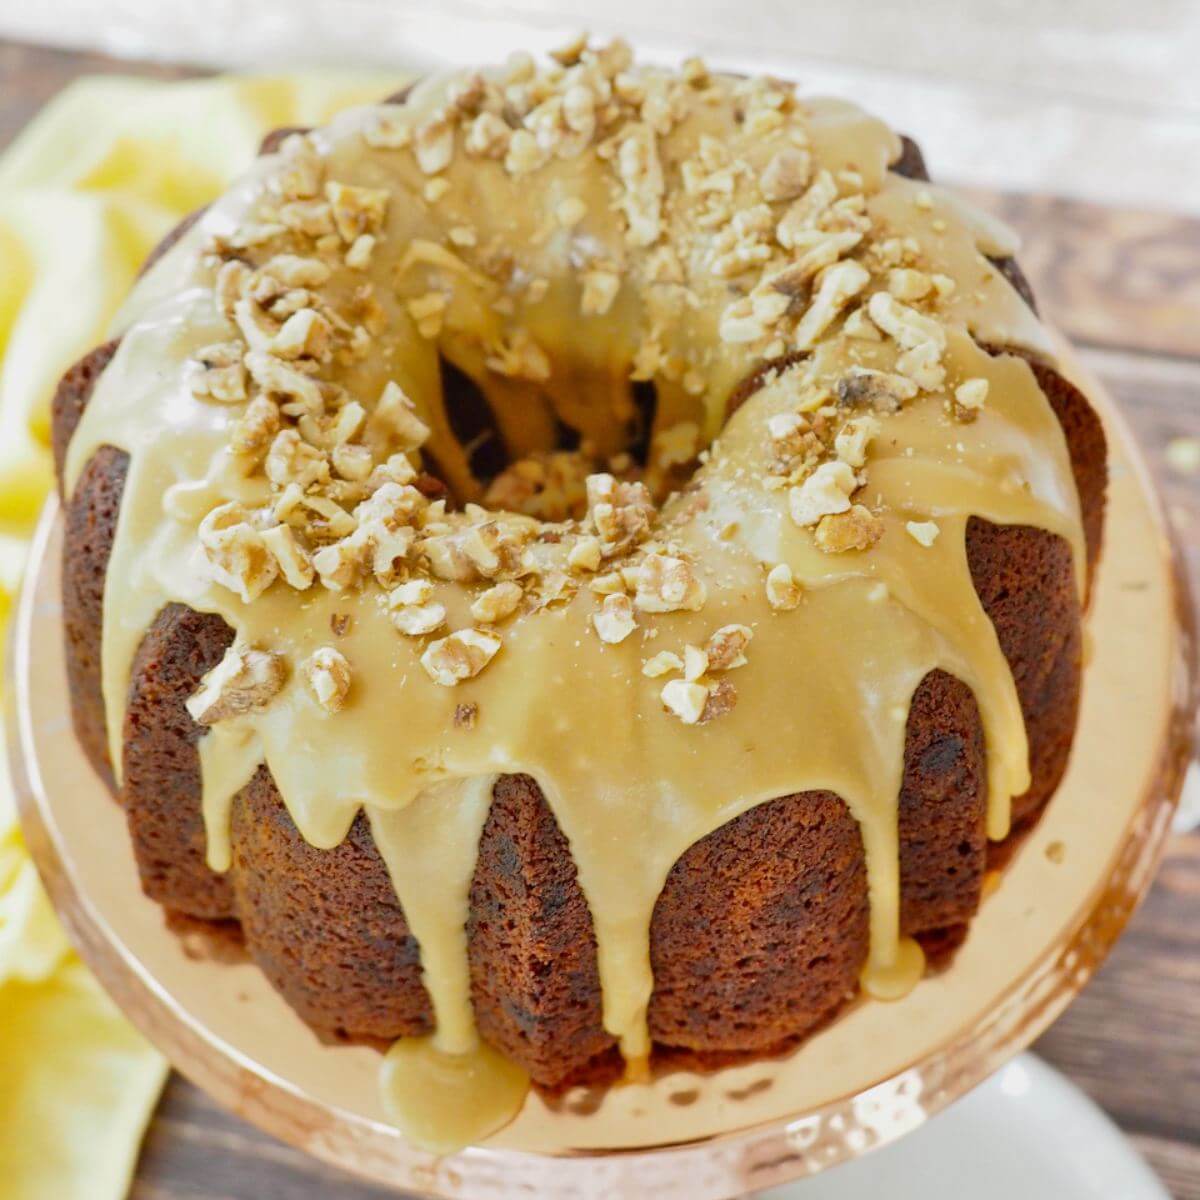 Close up of whole Banana Bread Bundt Cake with sauce and walnuts on platter.